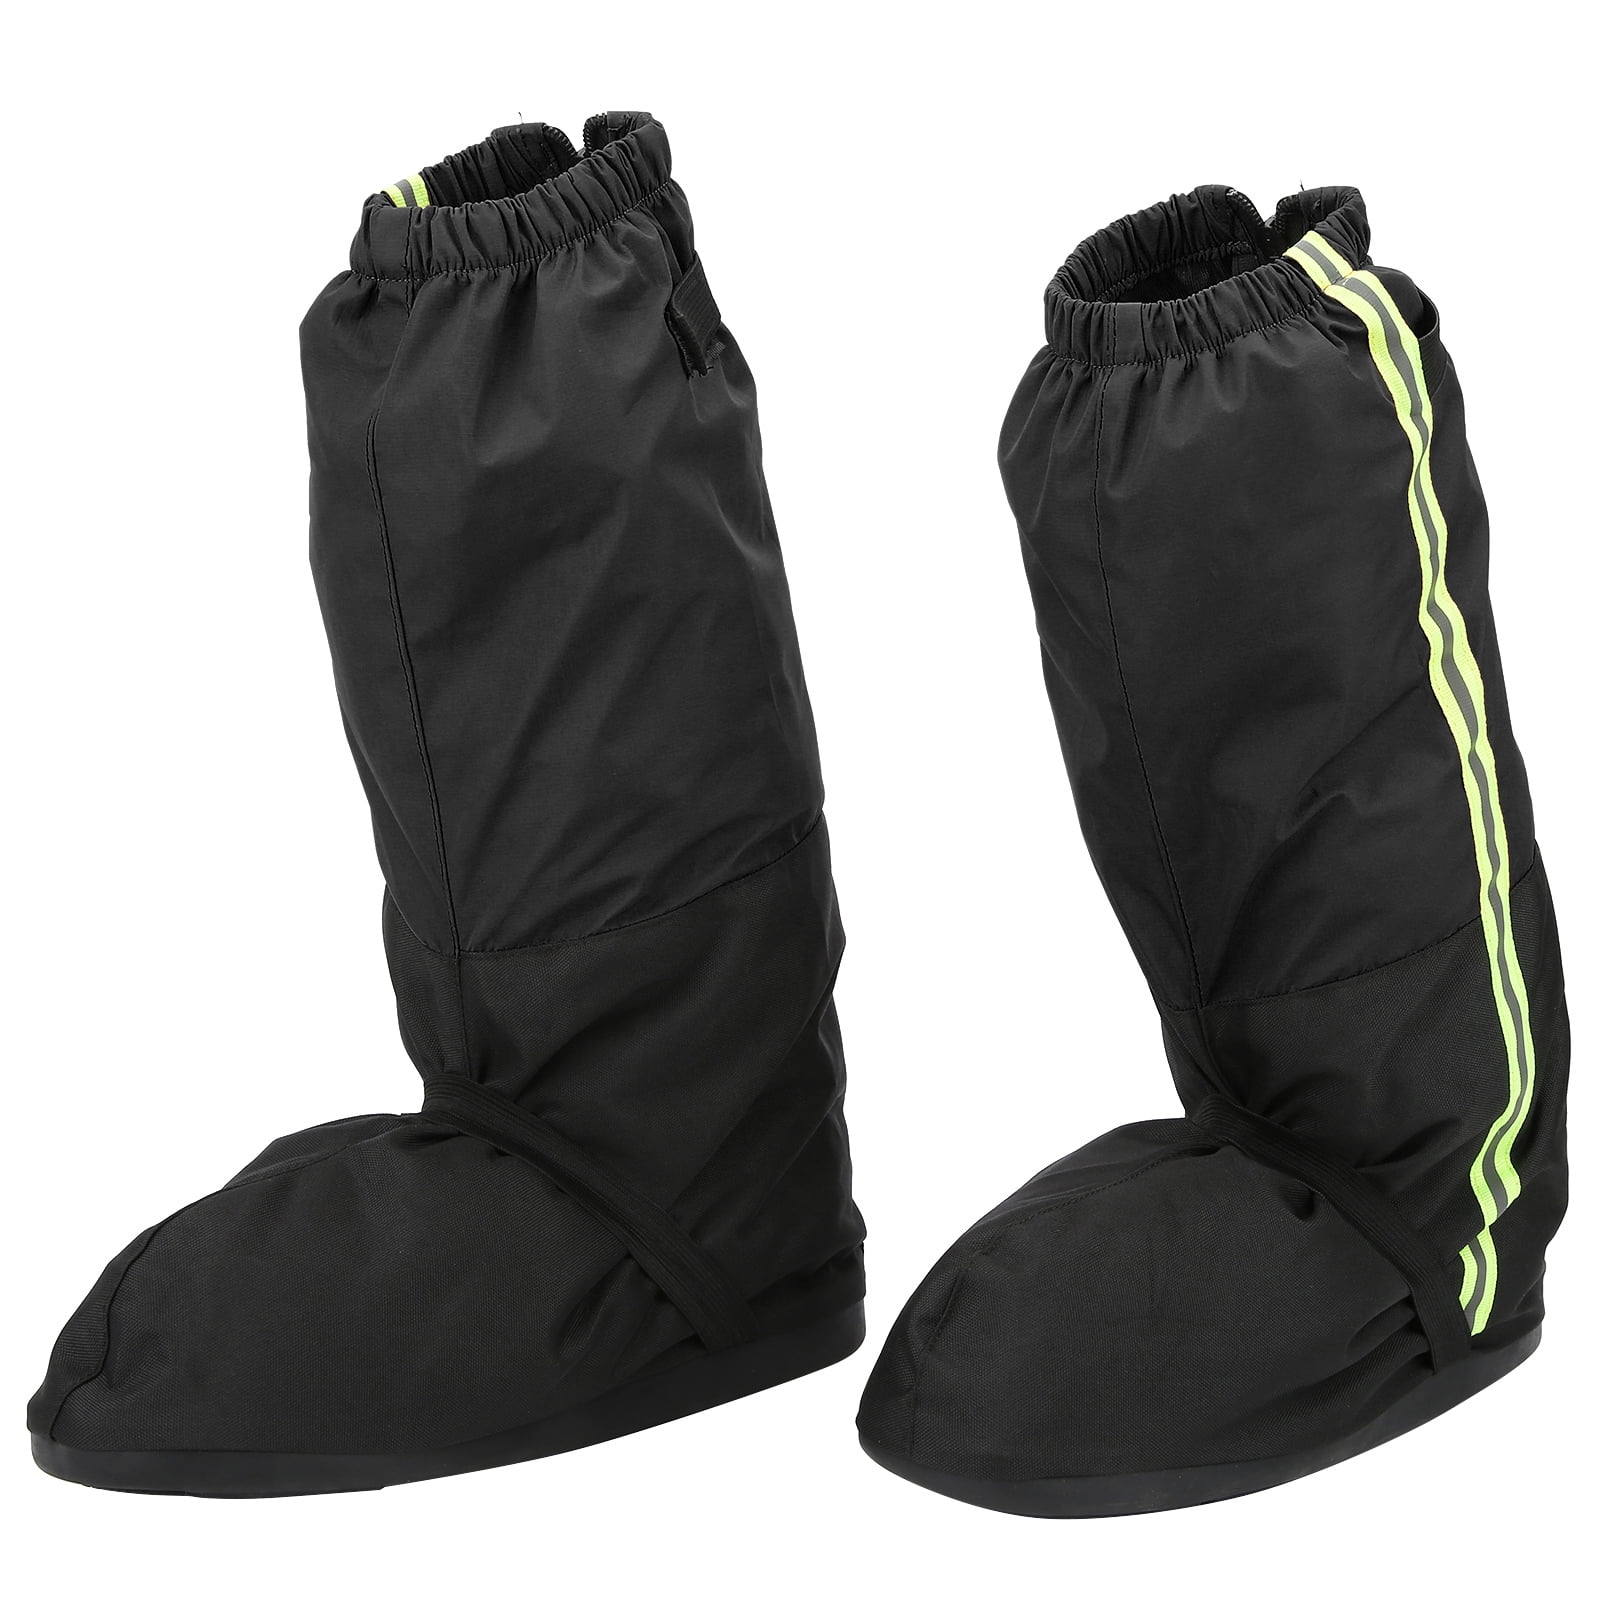 Details about   Outdoor Durable Hiking Waterproof Sand‑Proof High Tube Foot Cover w/Net Bag New 